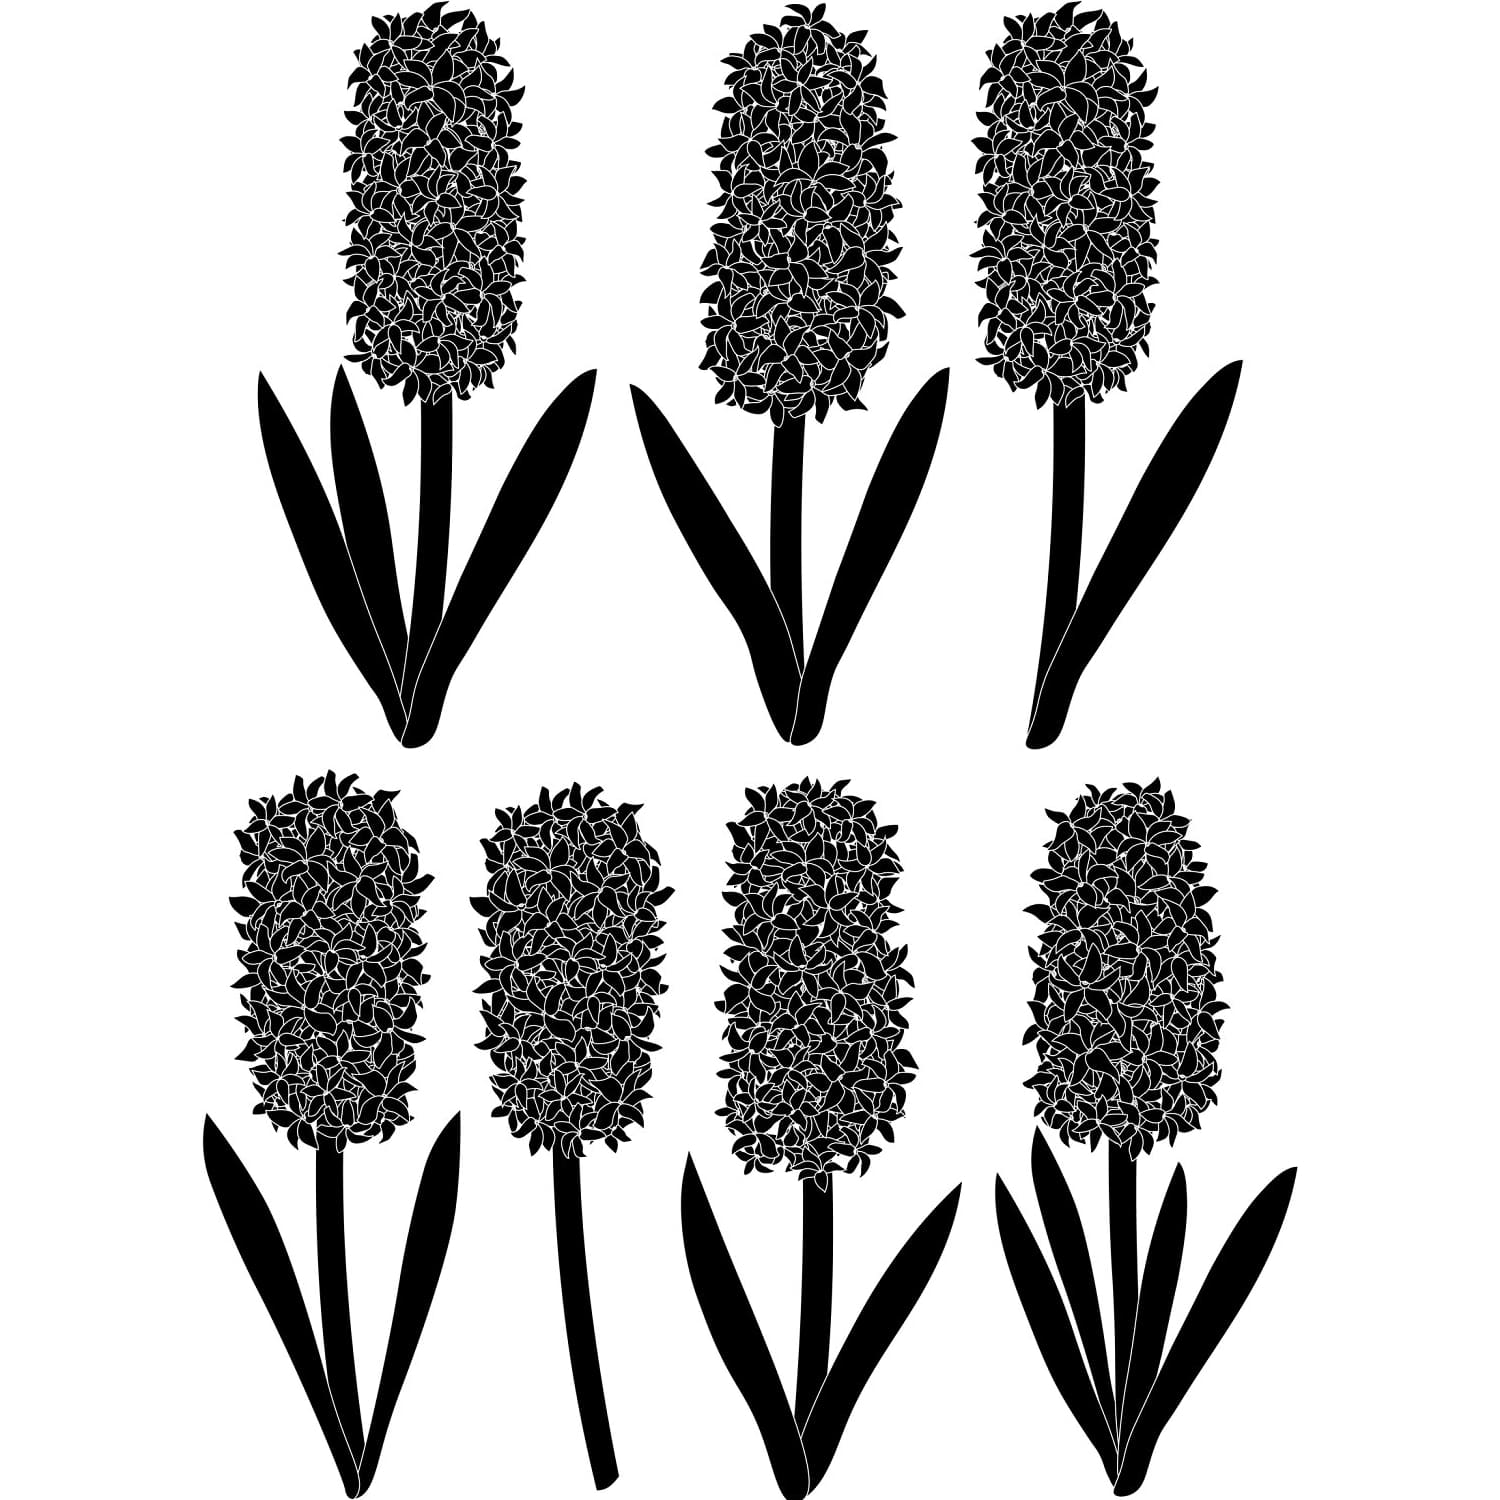 hyacinths flowers silhouettes vector.